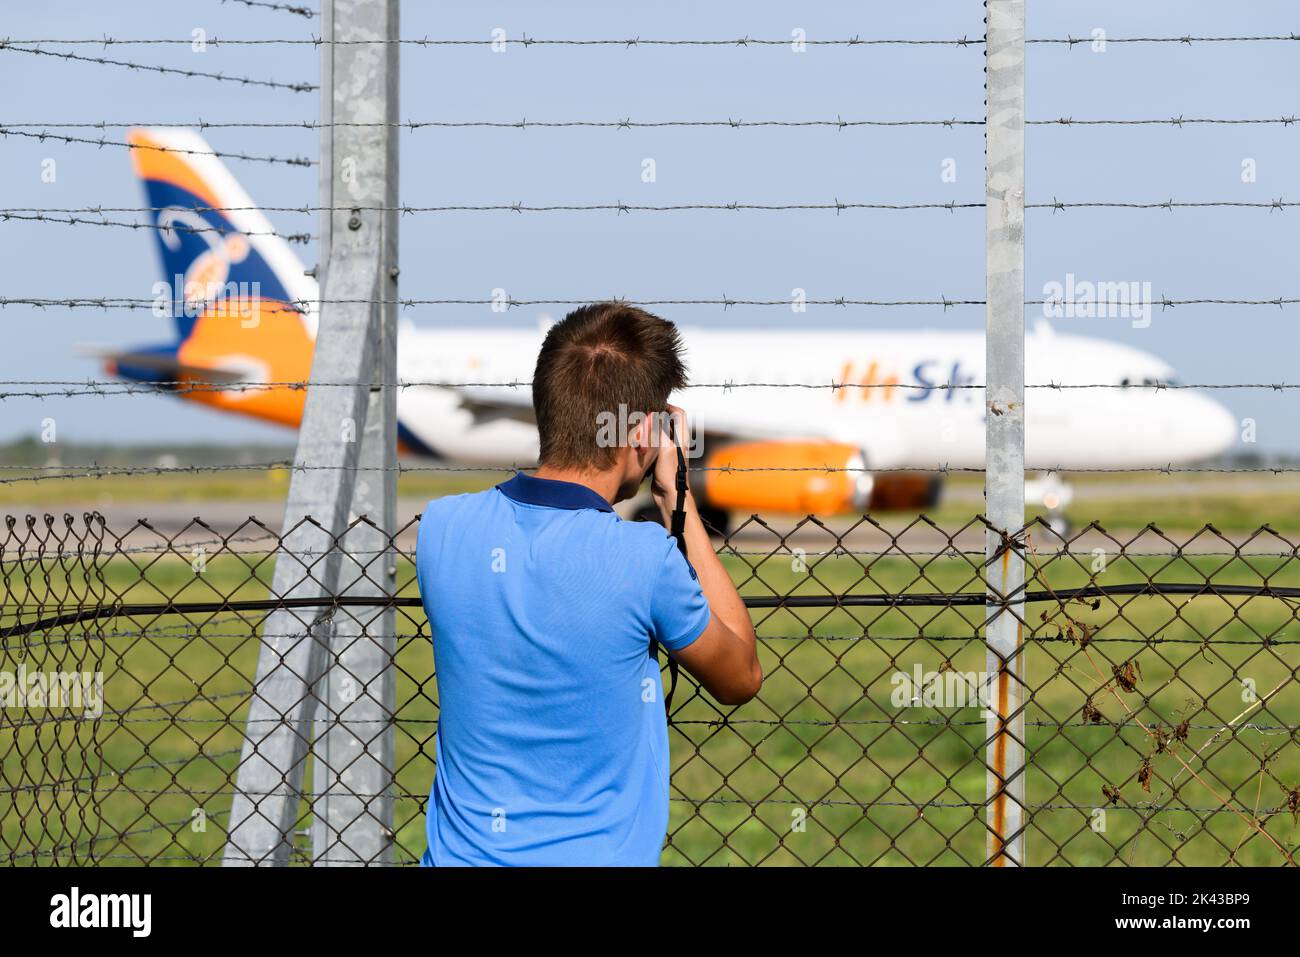 Plane spotter at Otopeni Airport, Bucharest, Romania. Plane spotting hobby consists in observing and photographing aircraf, planespotting by avgeek. Stock Photo